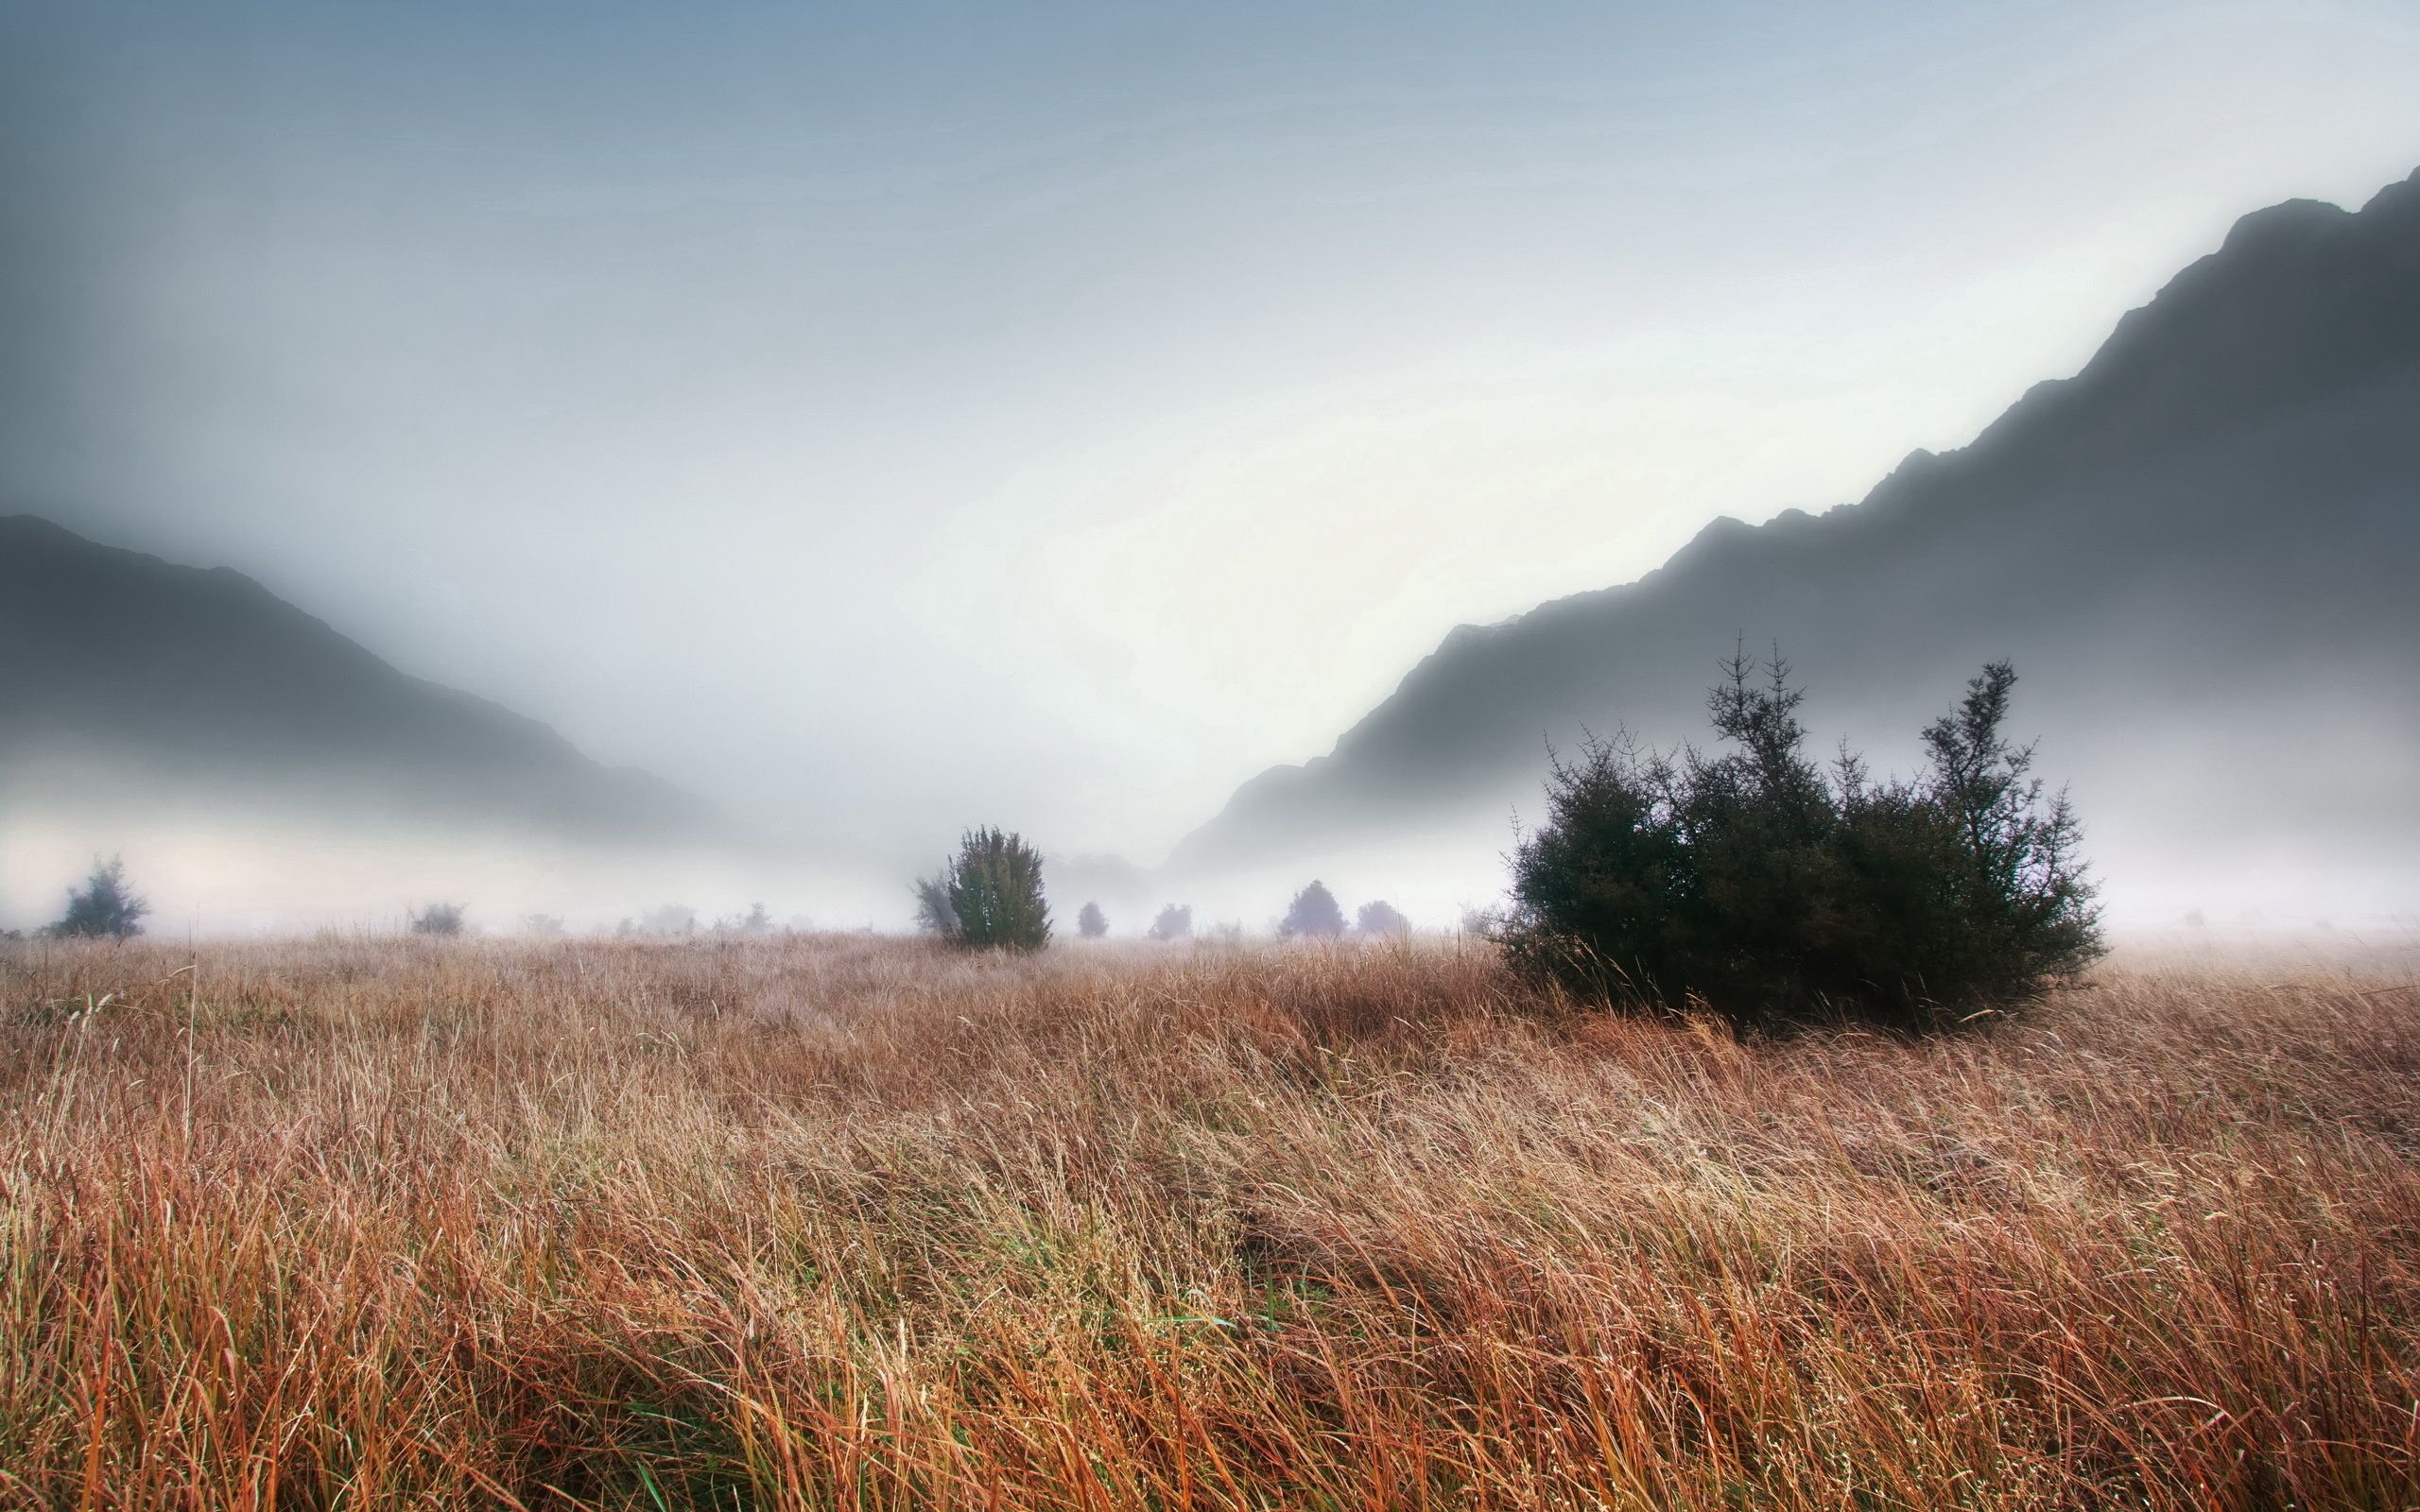 creepy, nature, grass, mountains, autumn, fog, thick, withered, it's a sly, haze, gloomy, ate download HD wallpaper